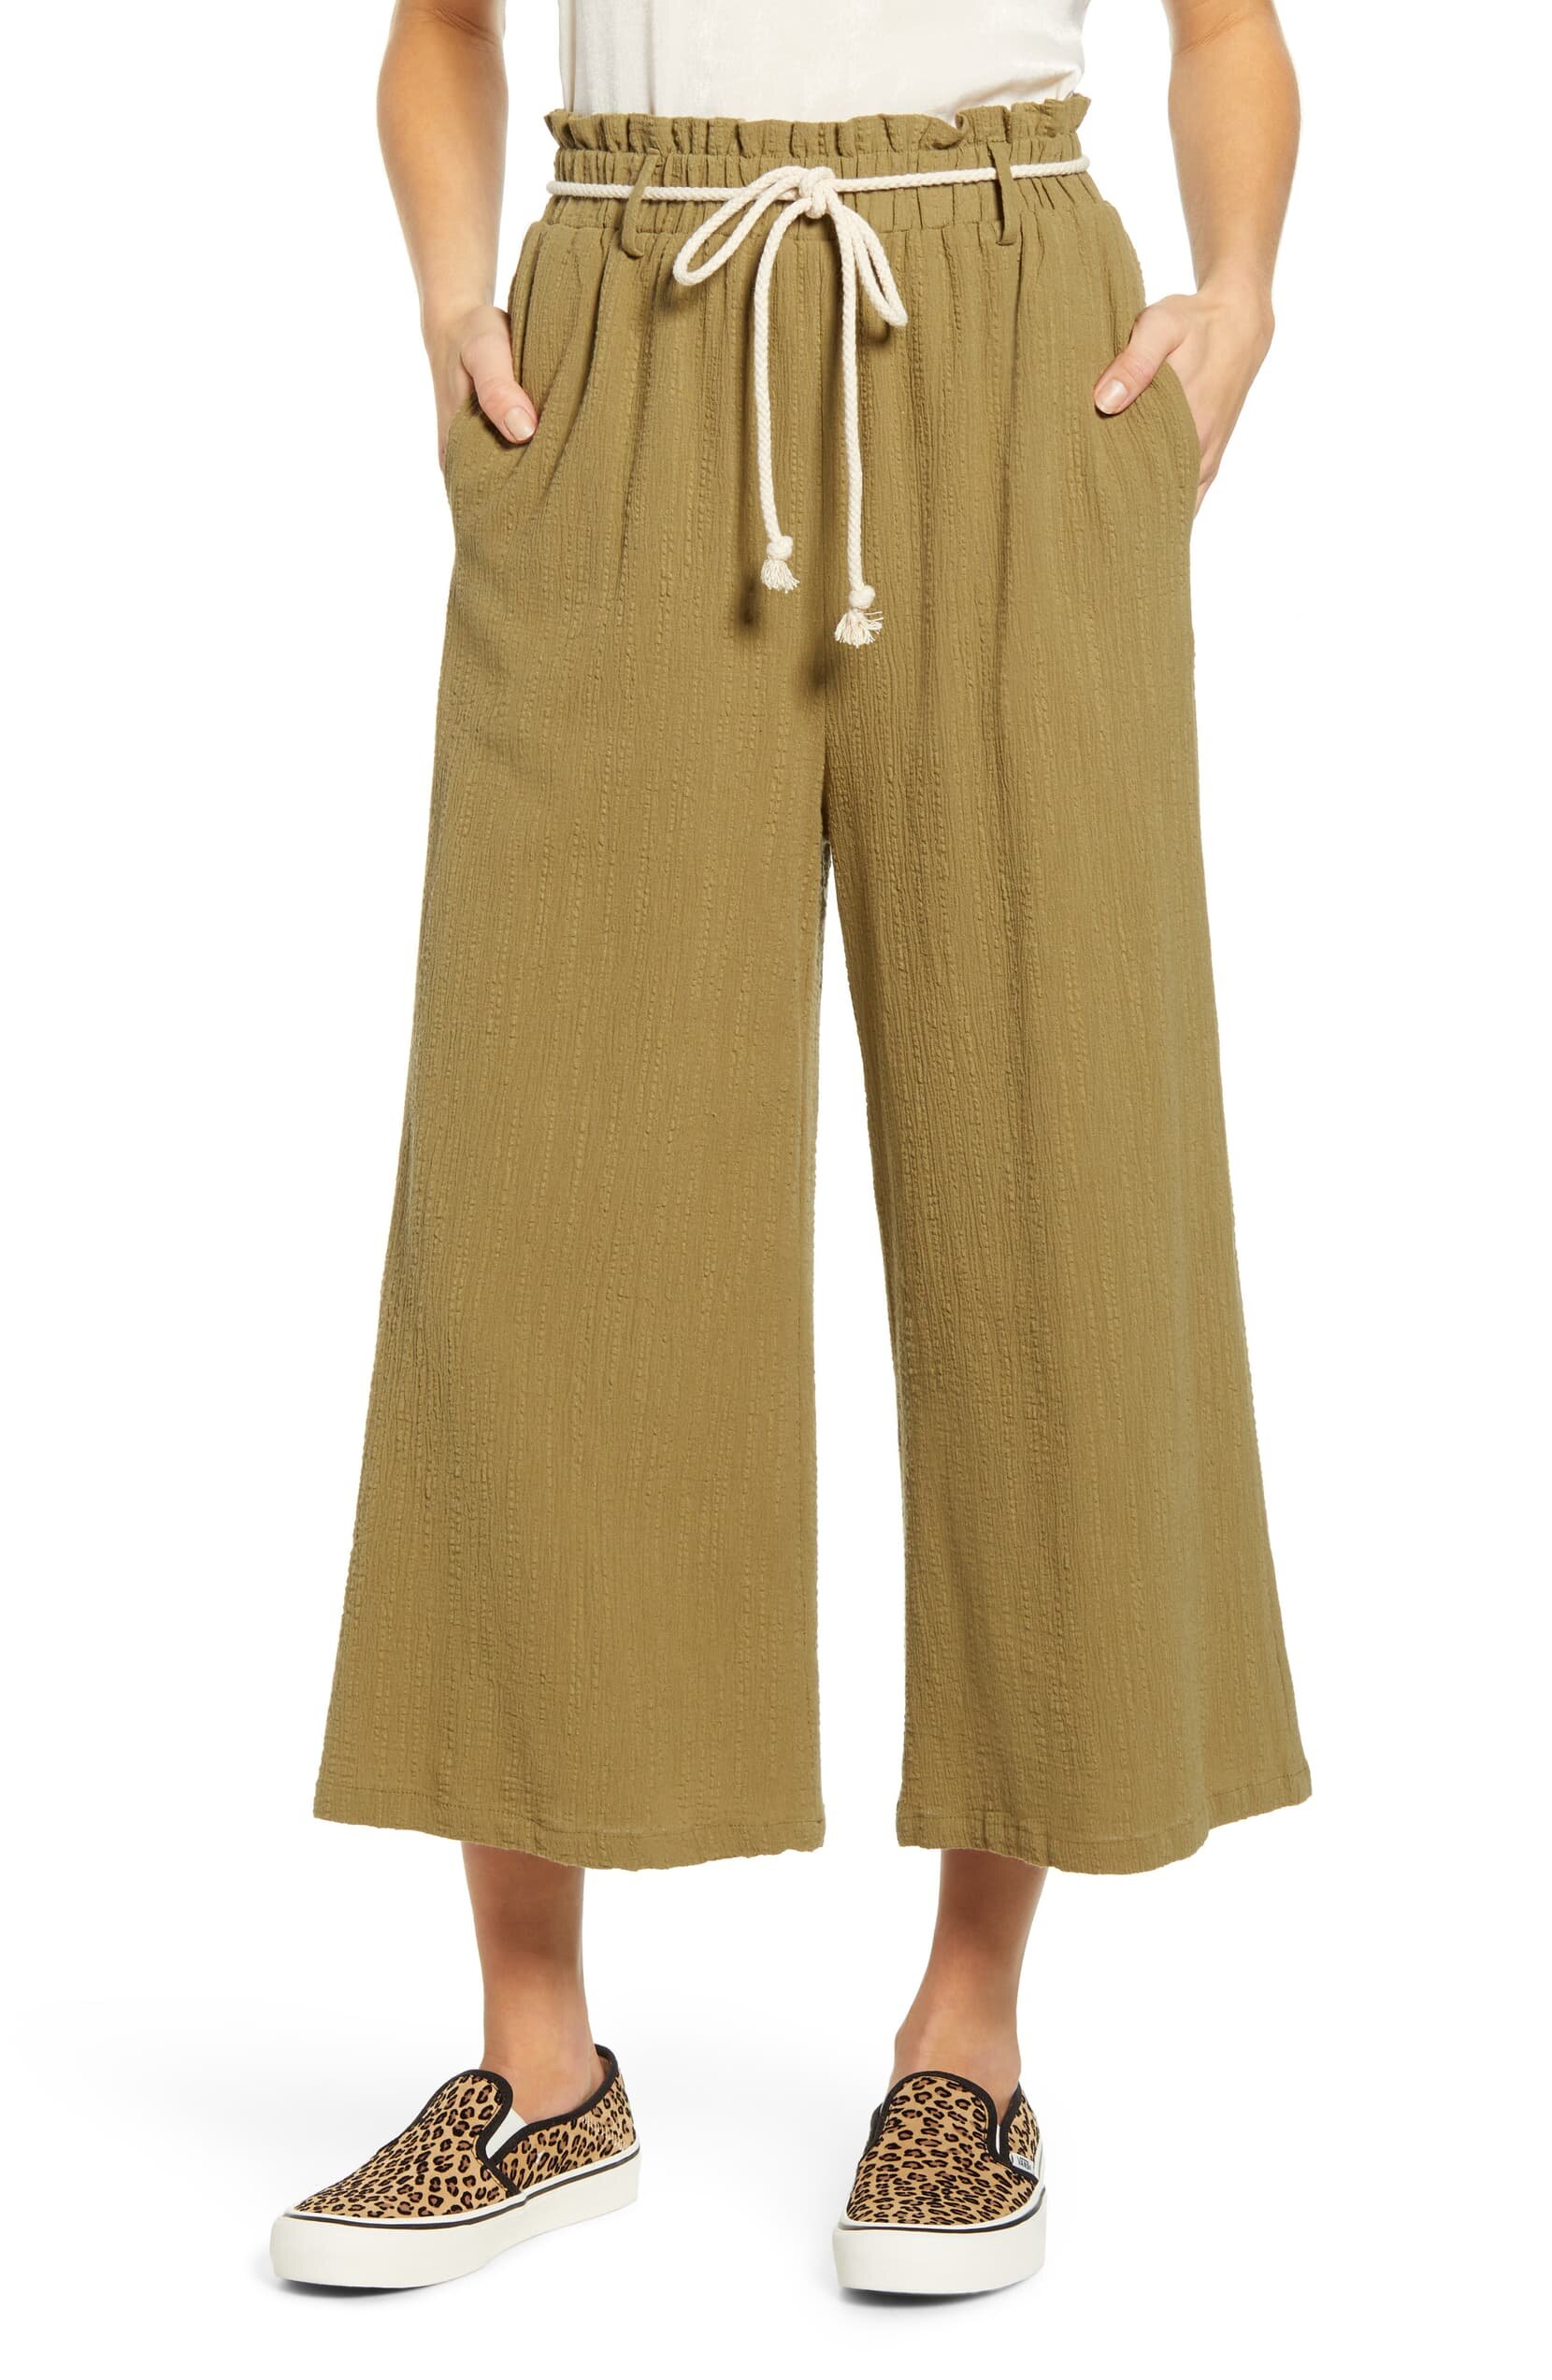 Crazy comfortable pants for less than $20. Done and done.